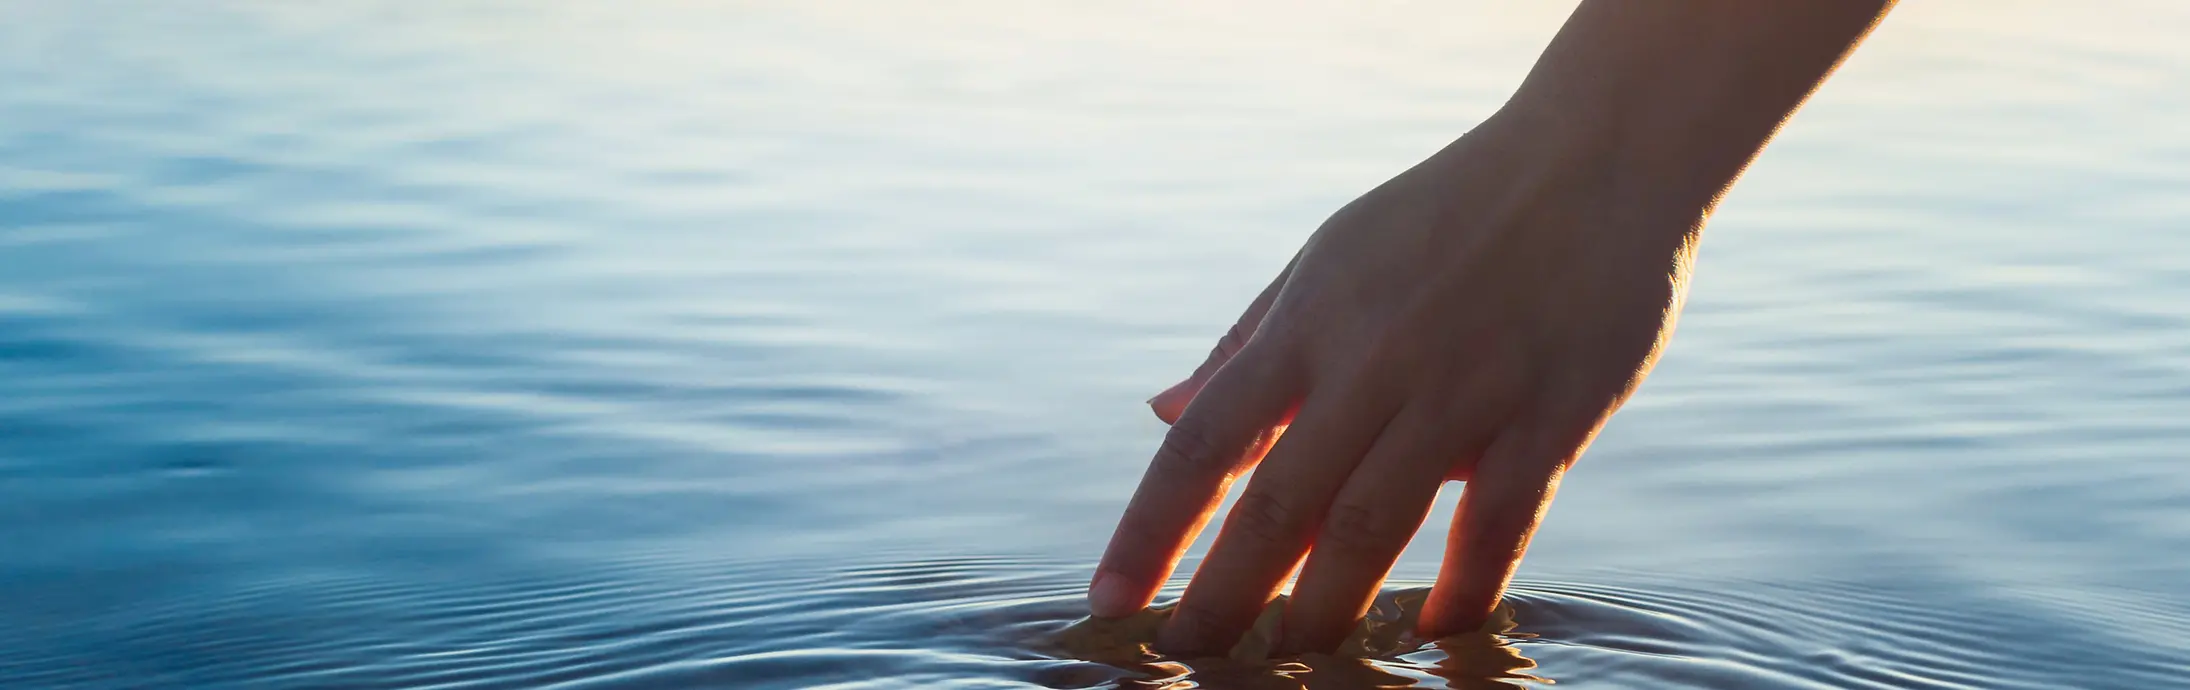 A hand strokes through a calm water surface in front of the horizon